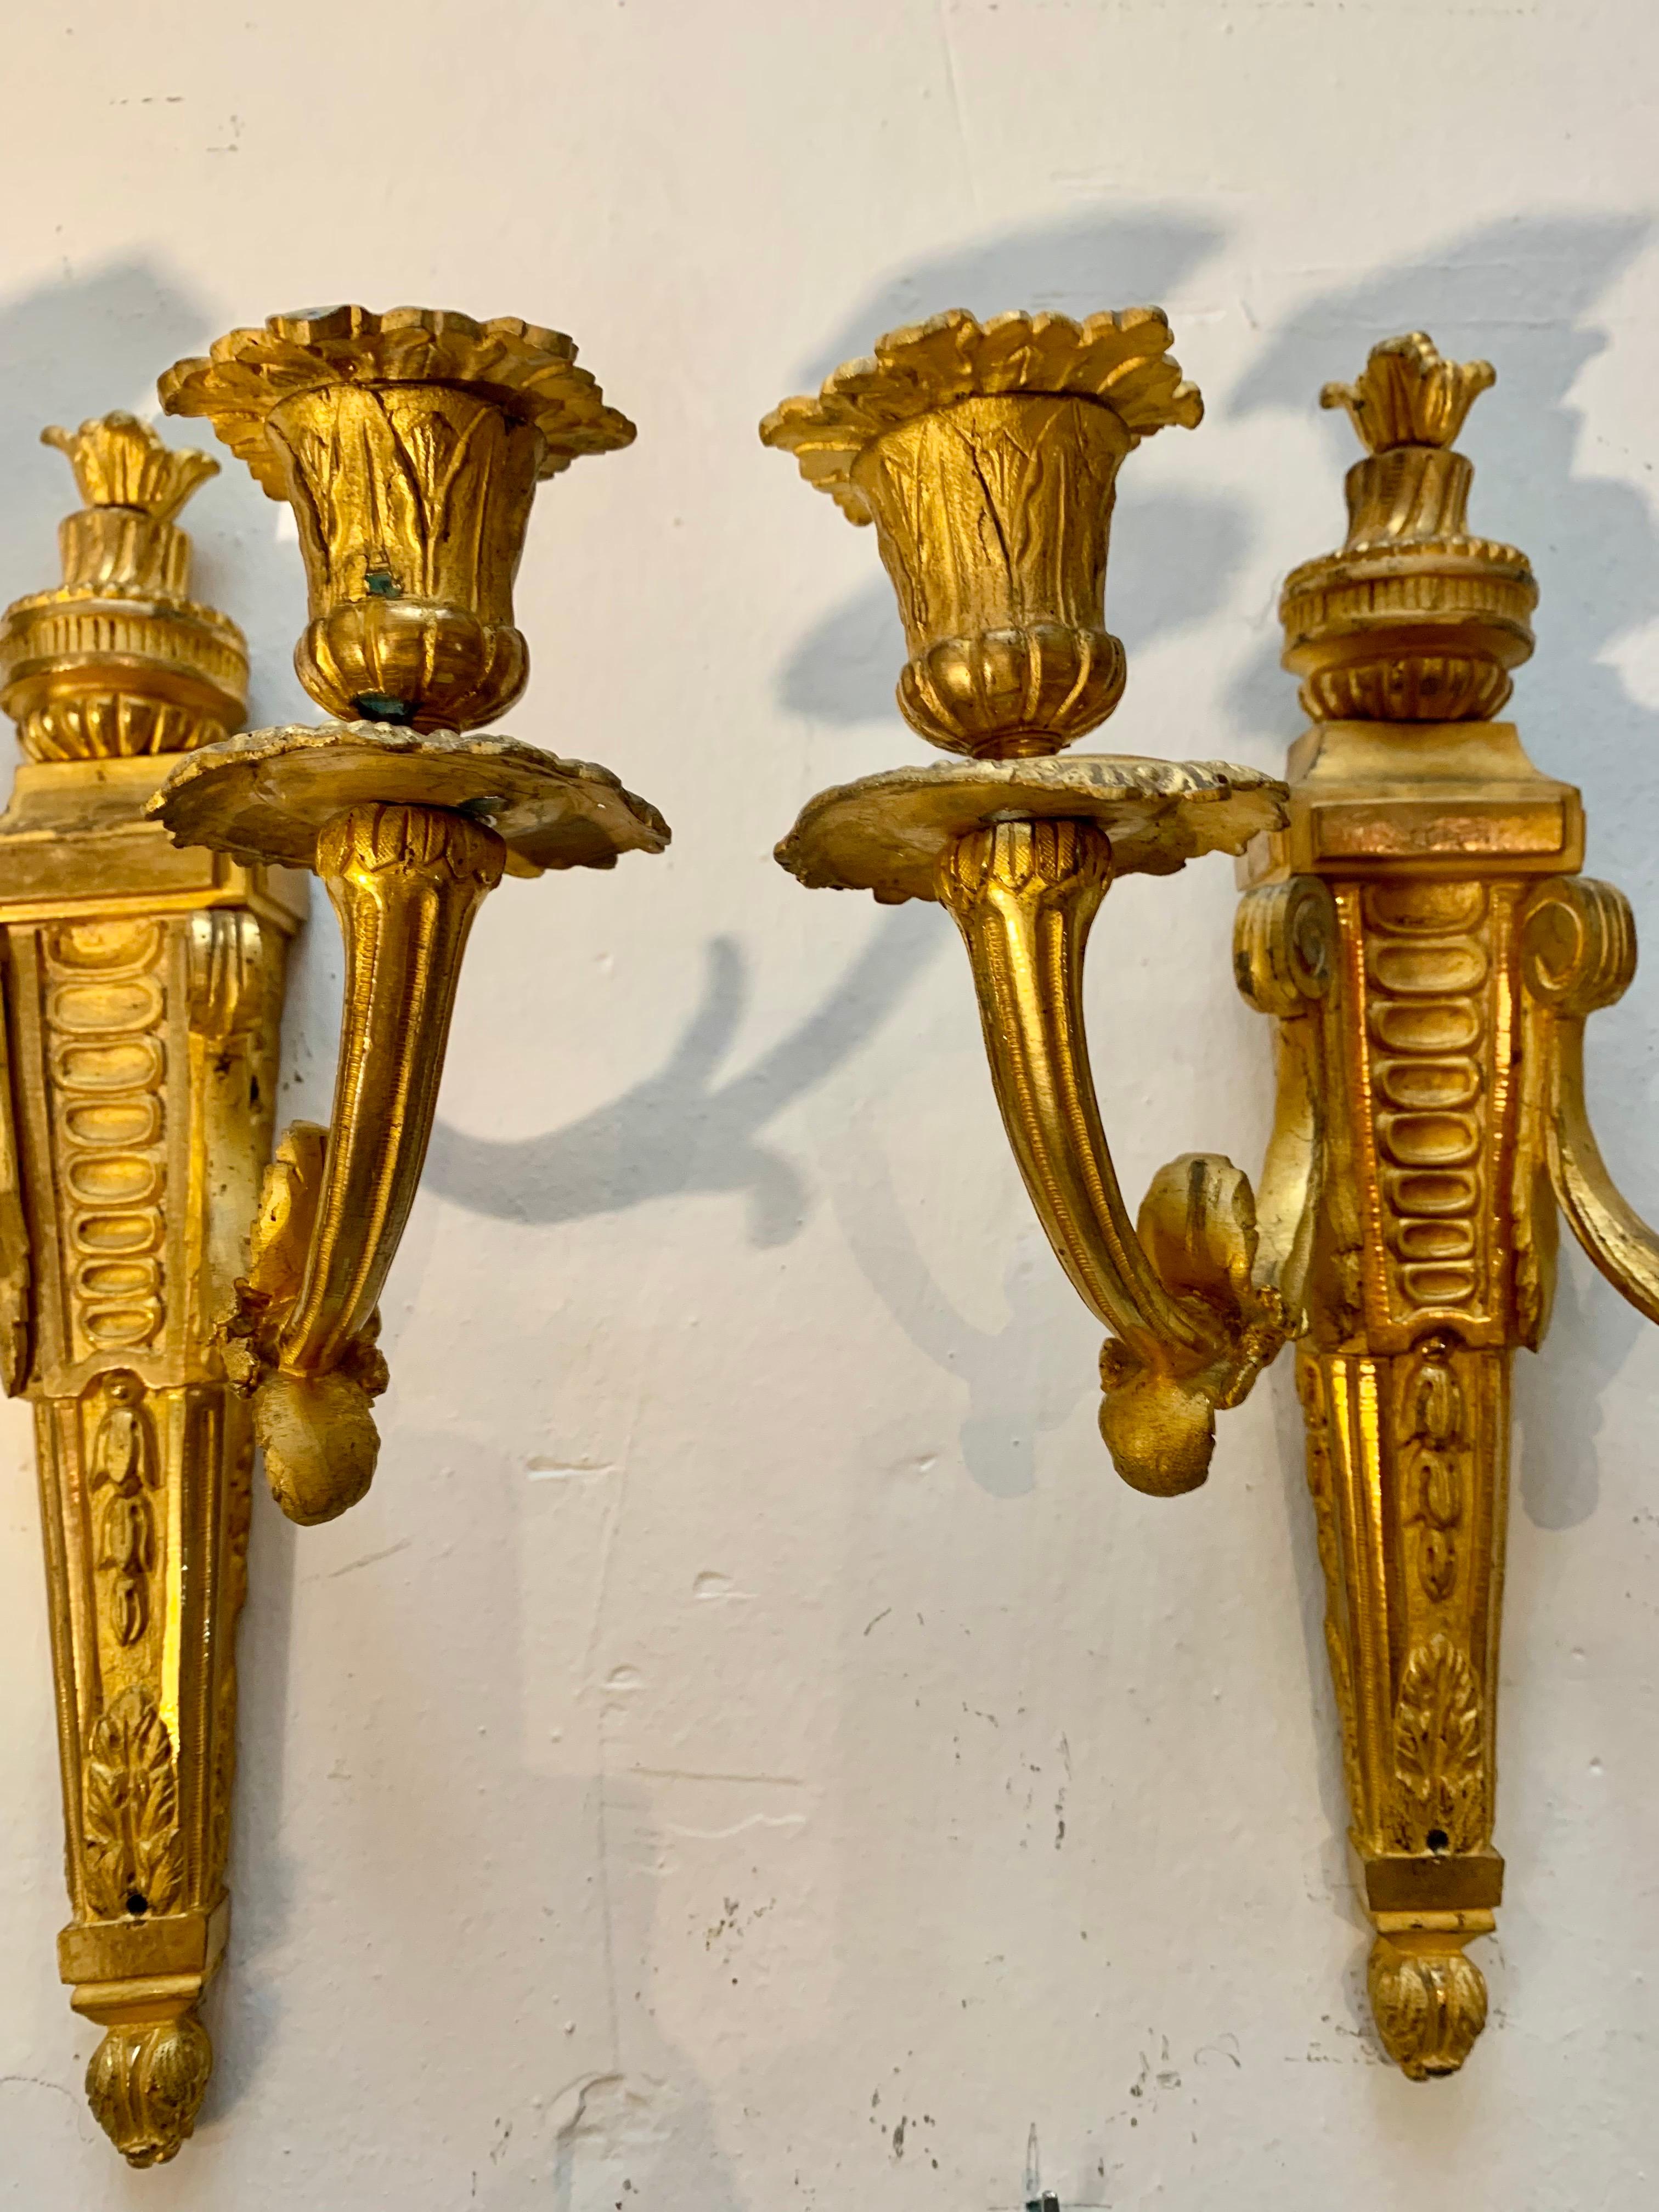 Pair of French Louis XVI style wall sconces from the mid-19th century. Ormolu sconces with all original gold. Each wall light consists of a well-chiseled central column decorated with acanthus leaves and garlands and the top topped by a goblet with